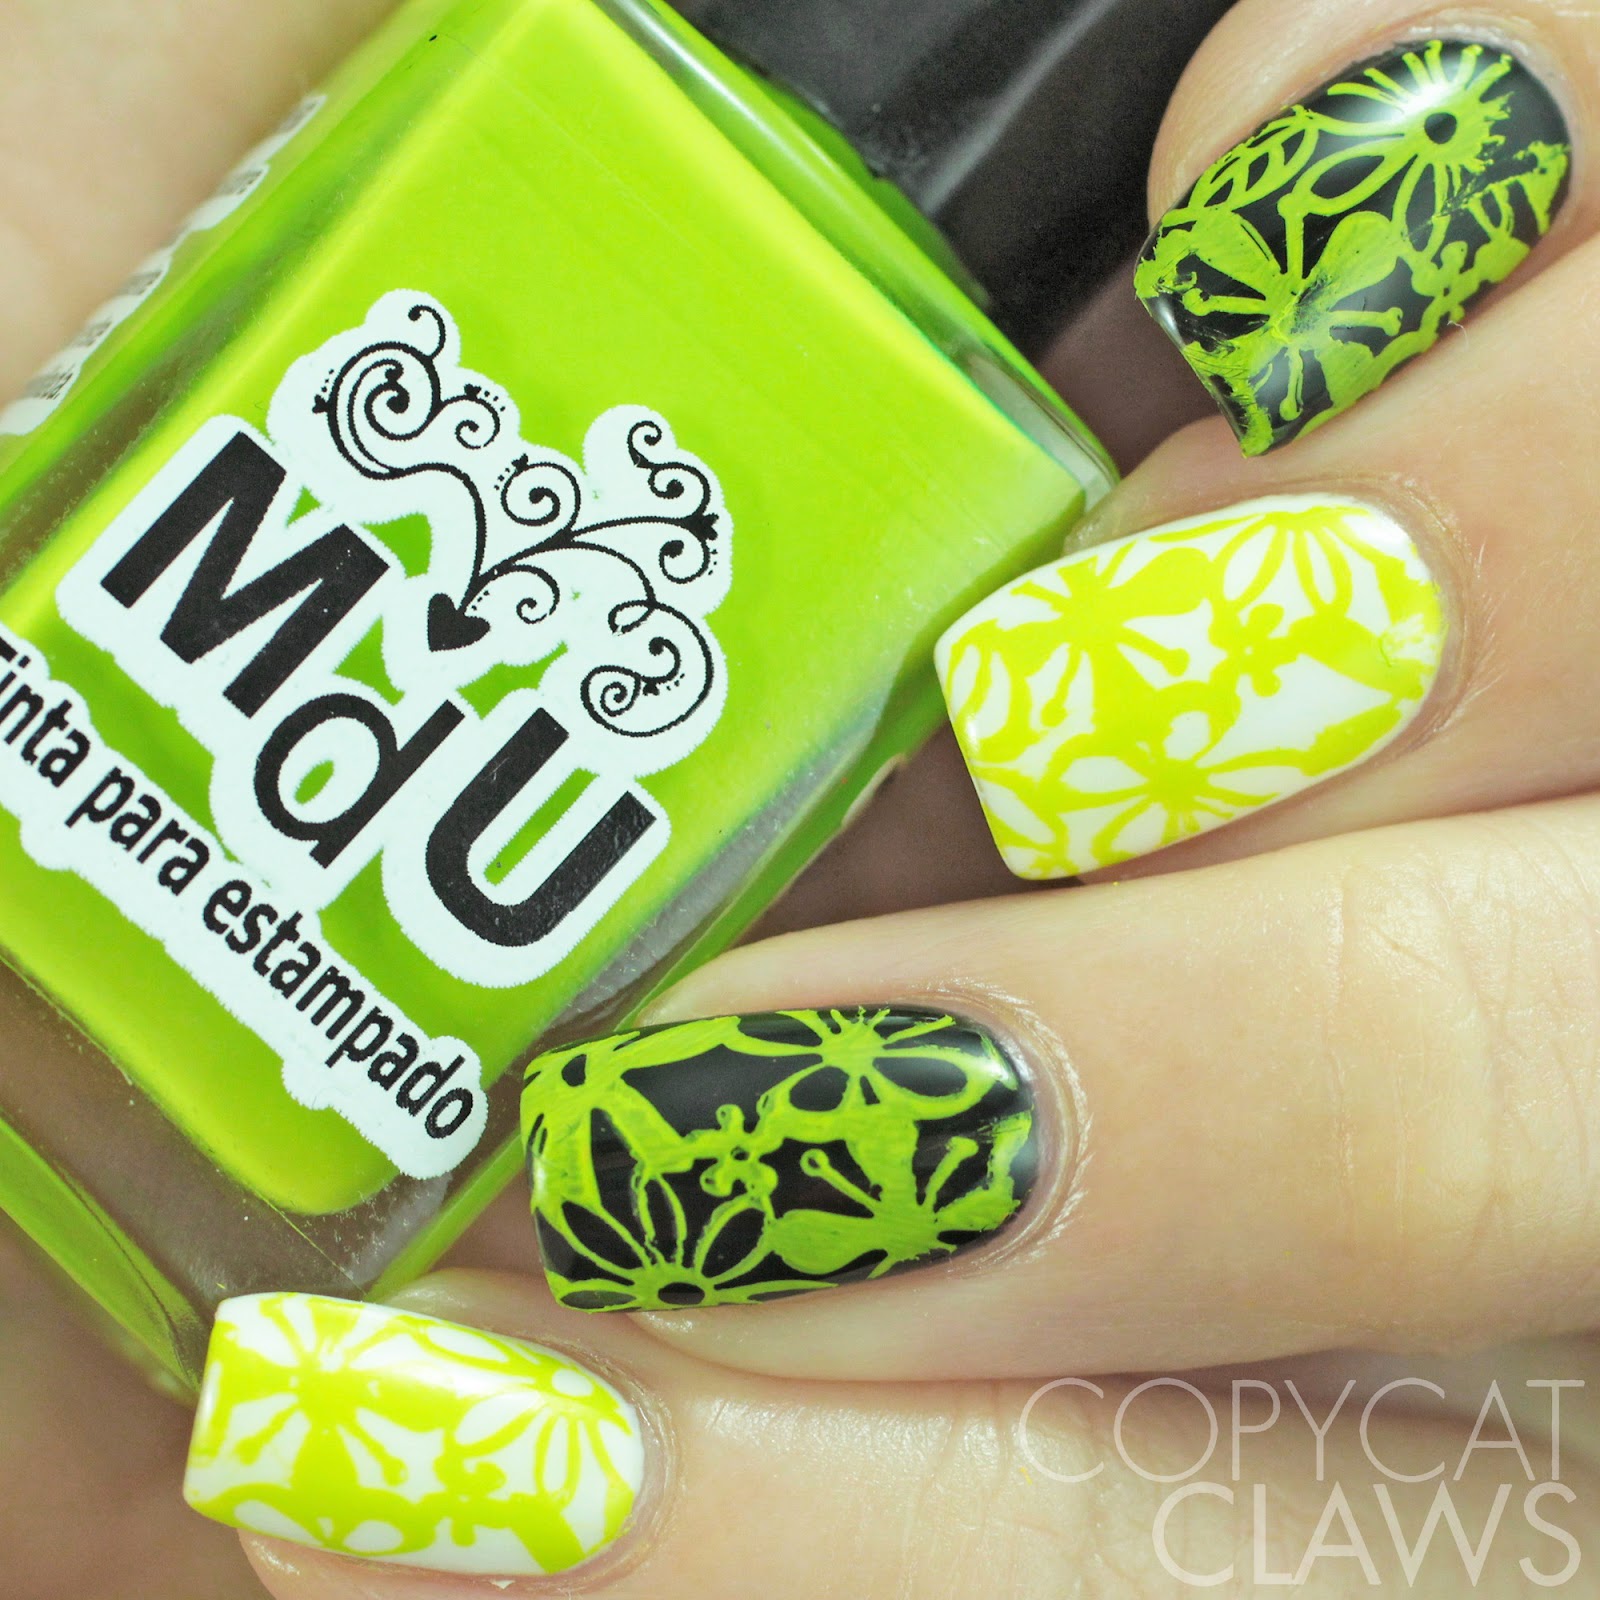 Copycat Claws: Mundo de Unas Cancun Stamping Polish Collection Swatches ...